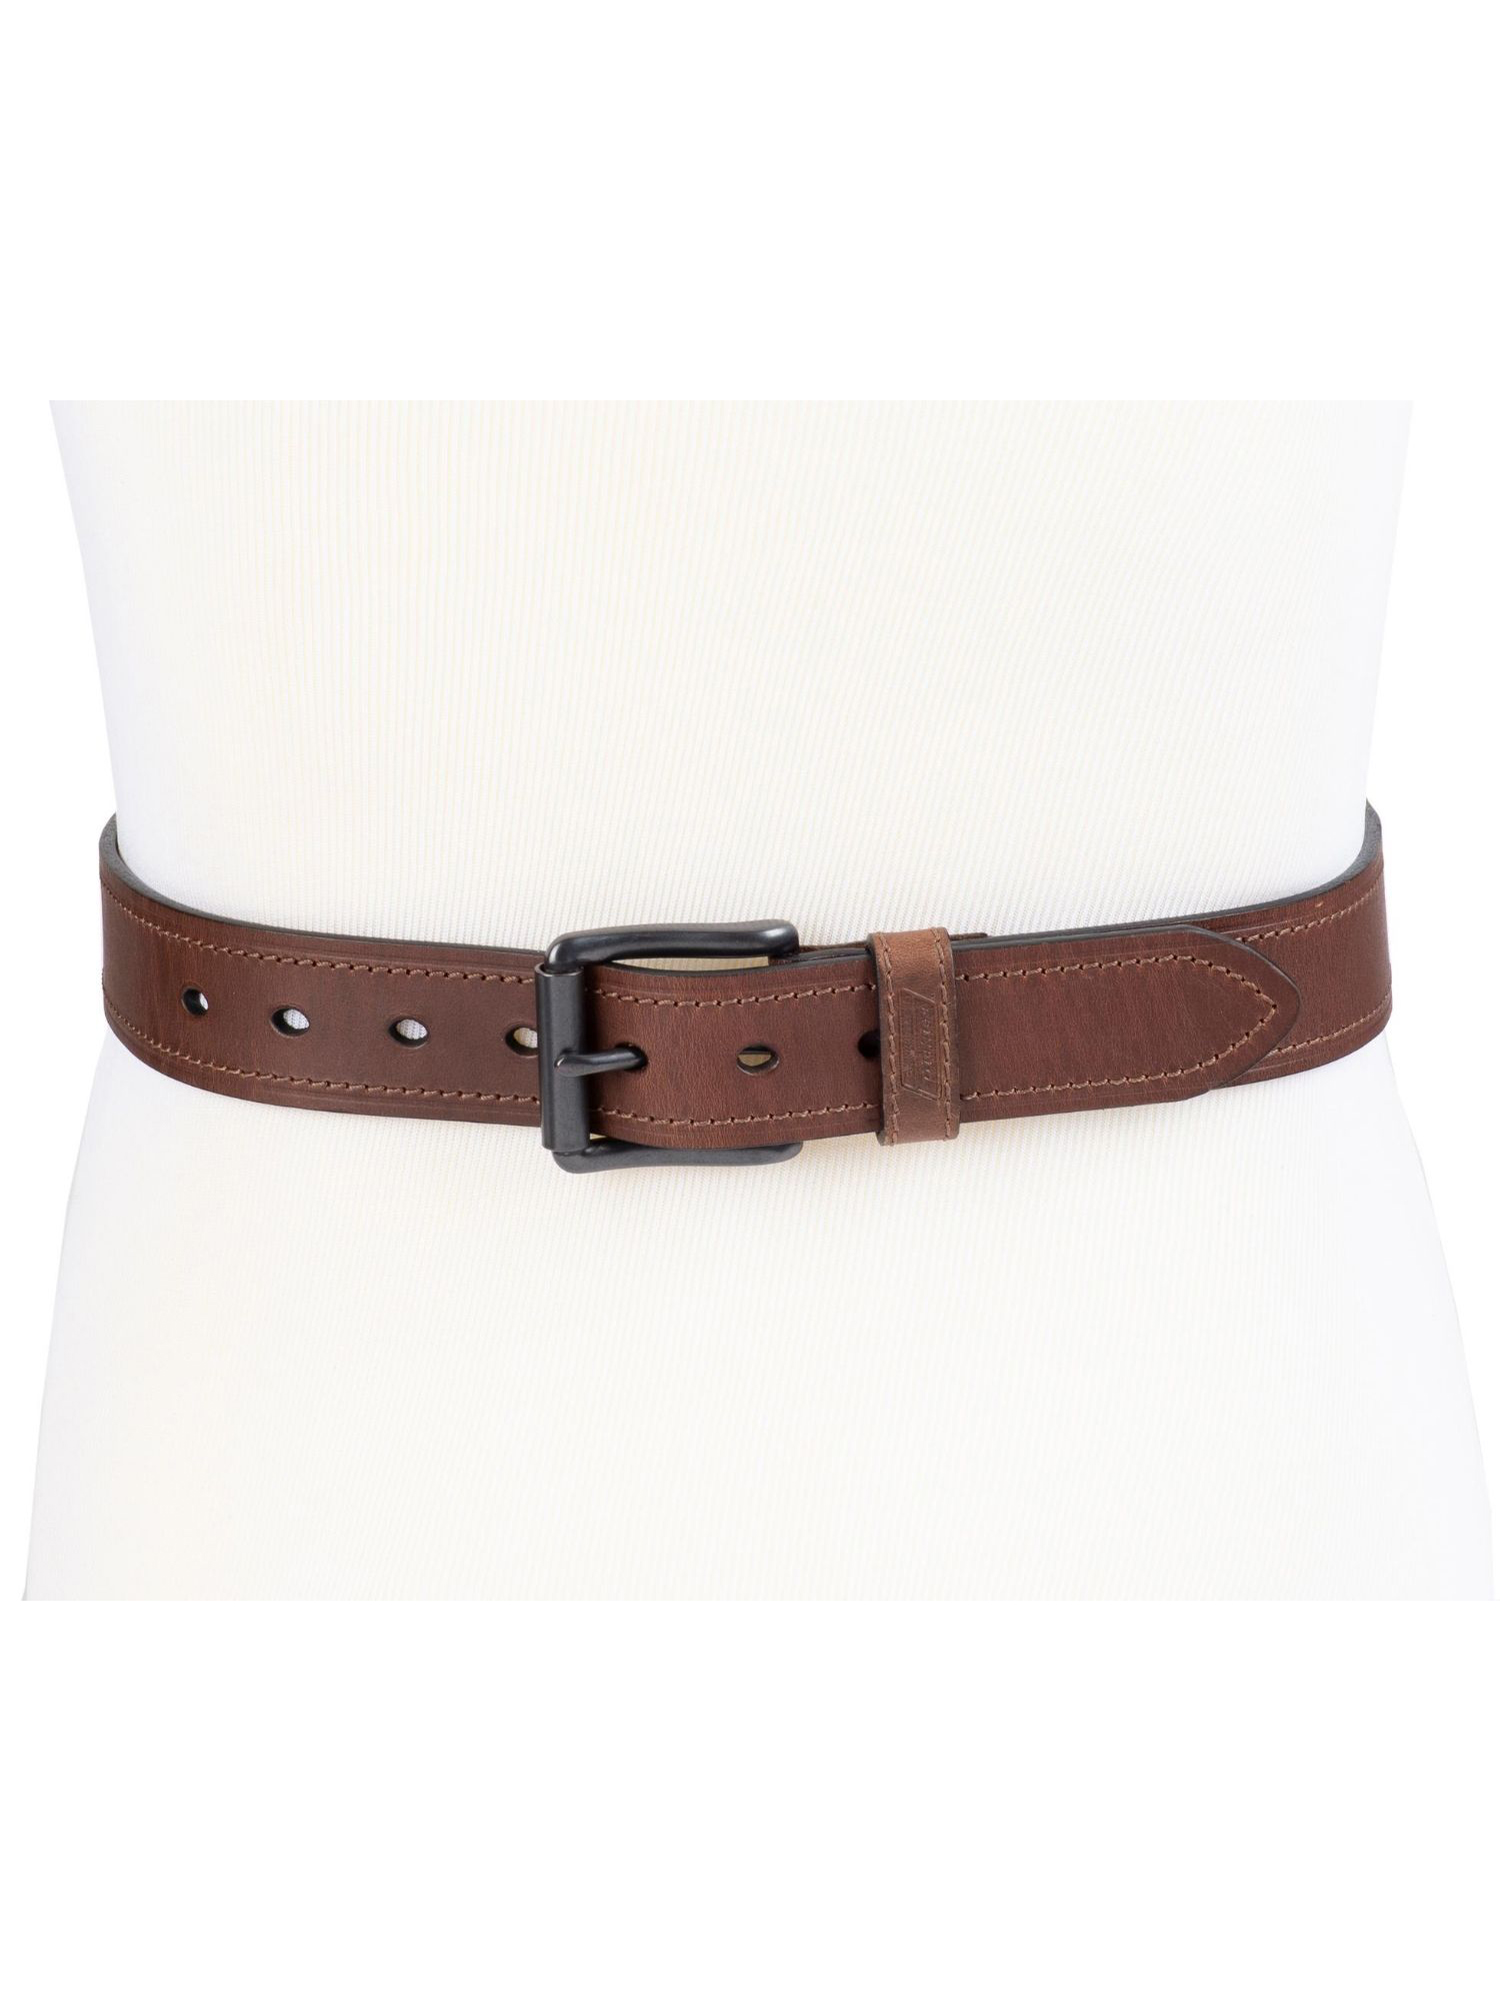 Genuine Dickies Men's Casual Brown Leather Work Belt with Roller Buckle (Regular and Big & Tall Sizes) - image 2 of 5